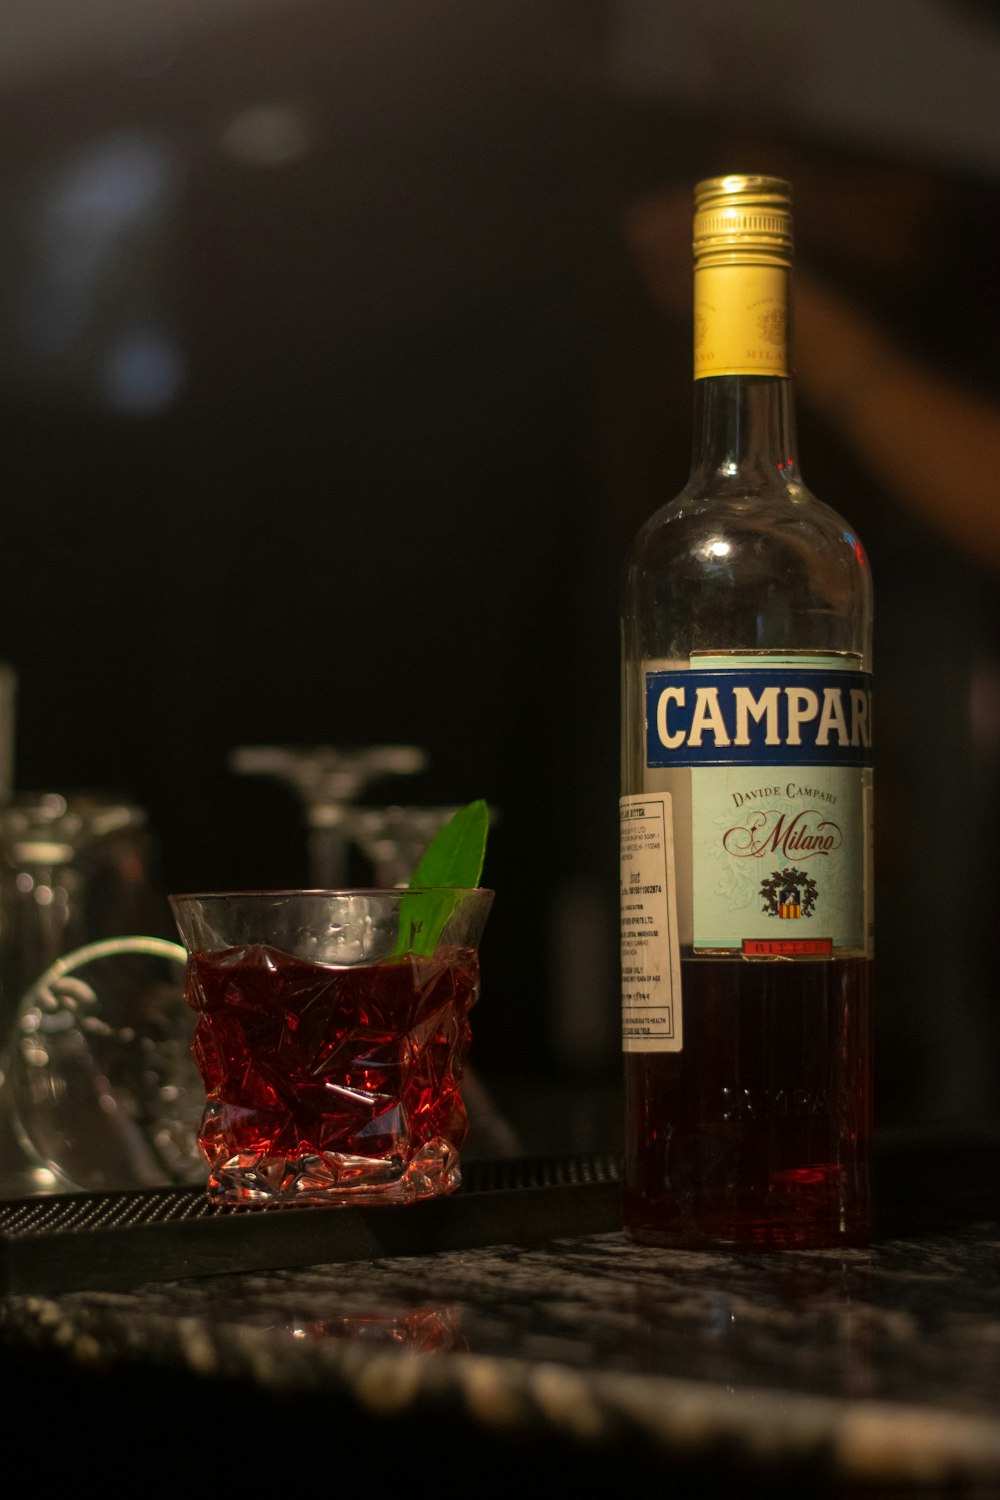 a bottle of campari next to a glass of wine